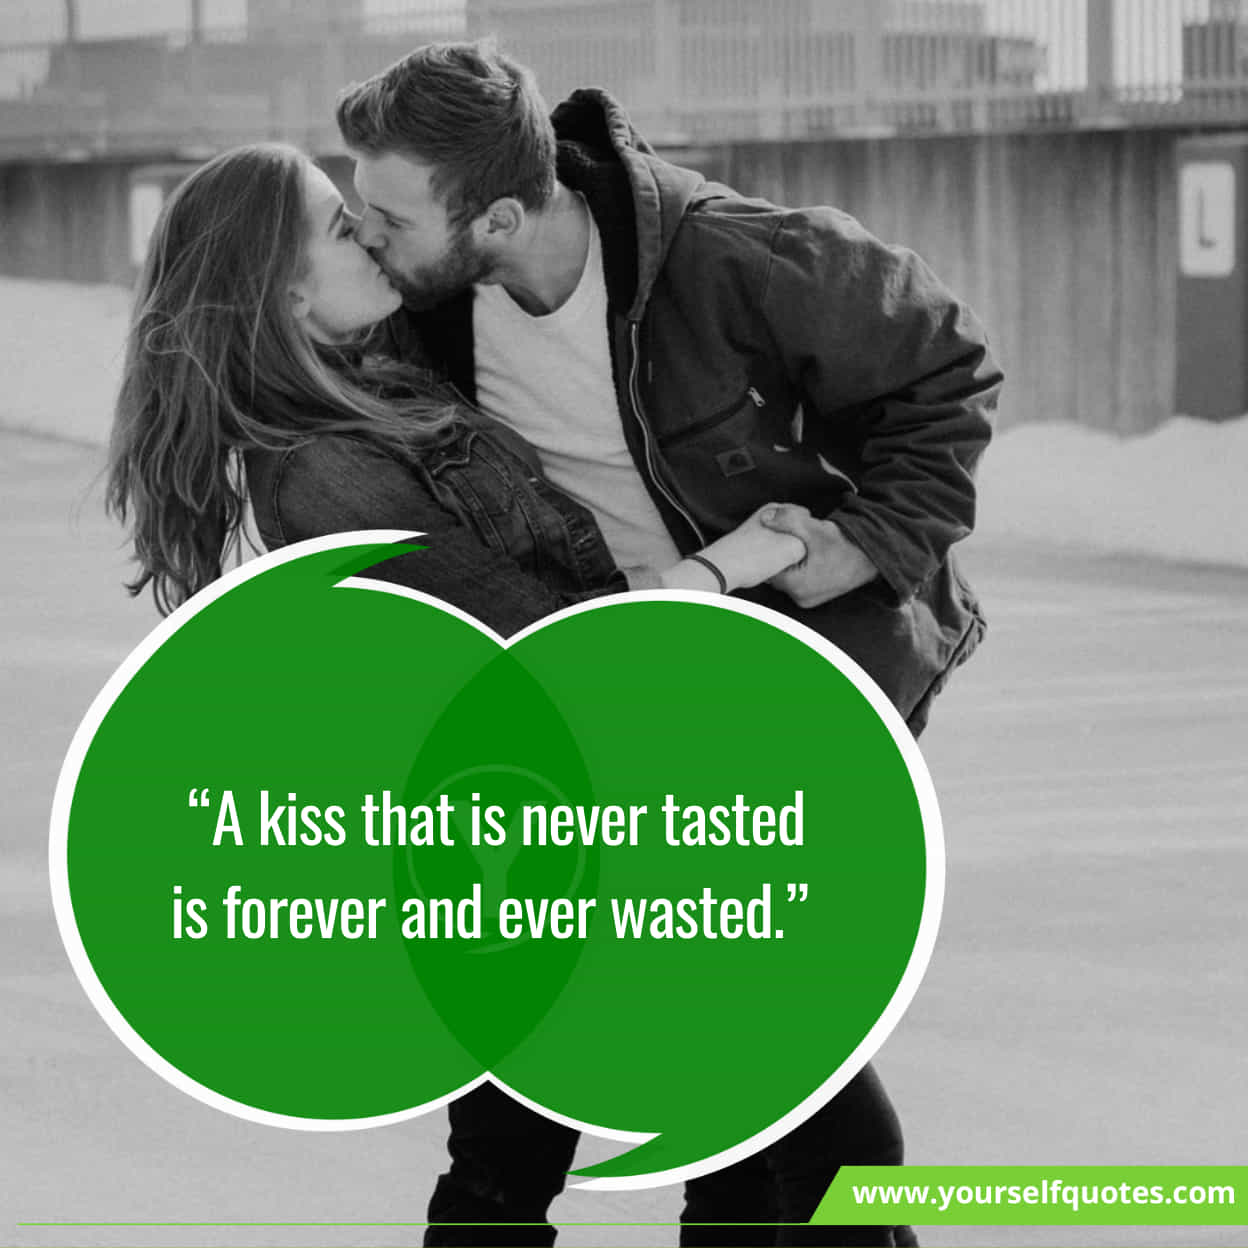 Best Quotes On International Kissing Day